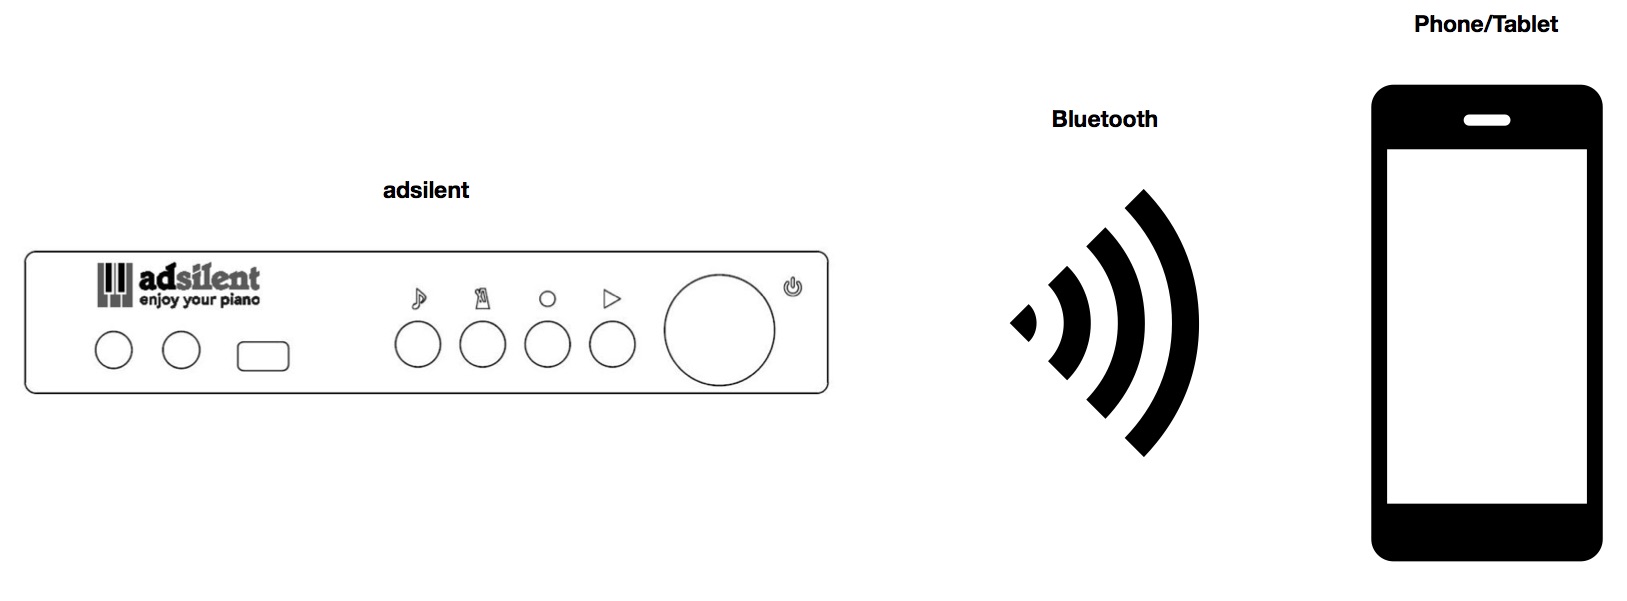 Diagram showing how bluetooth can be used with adsilent system